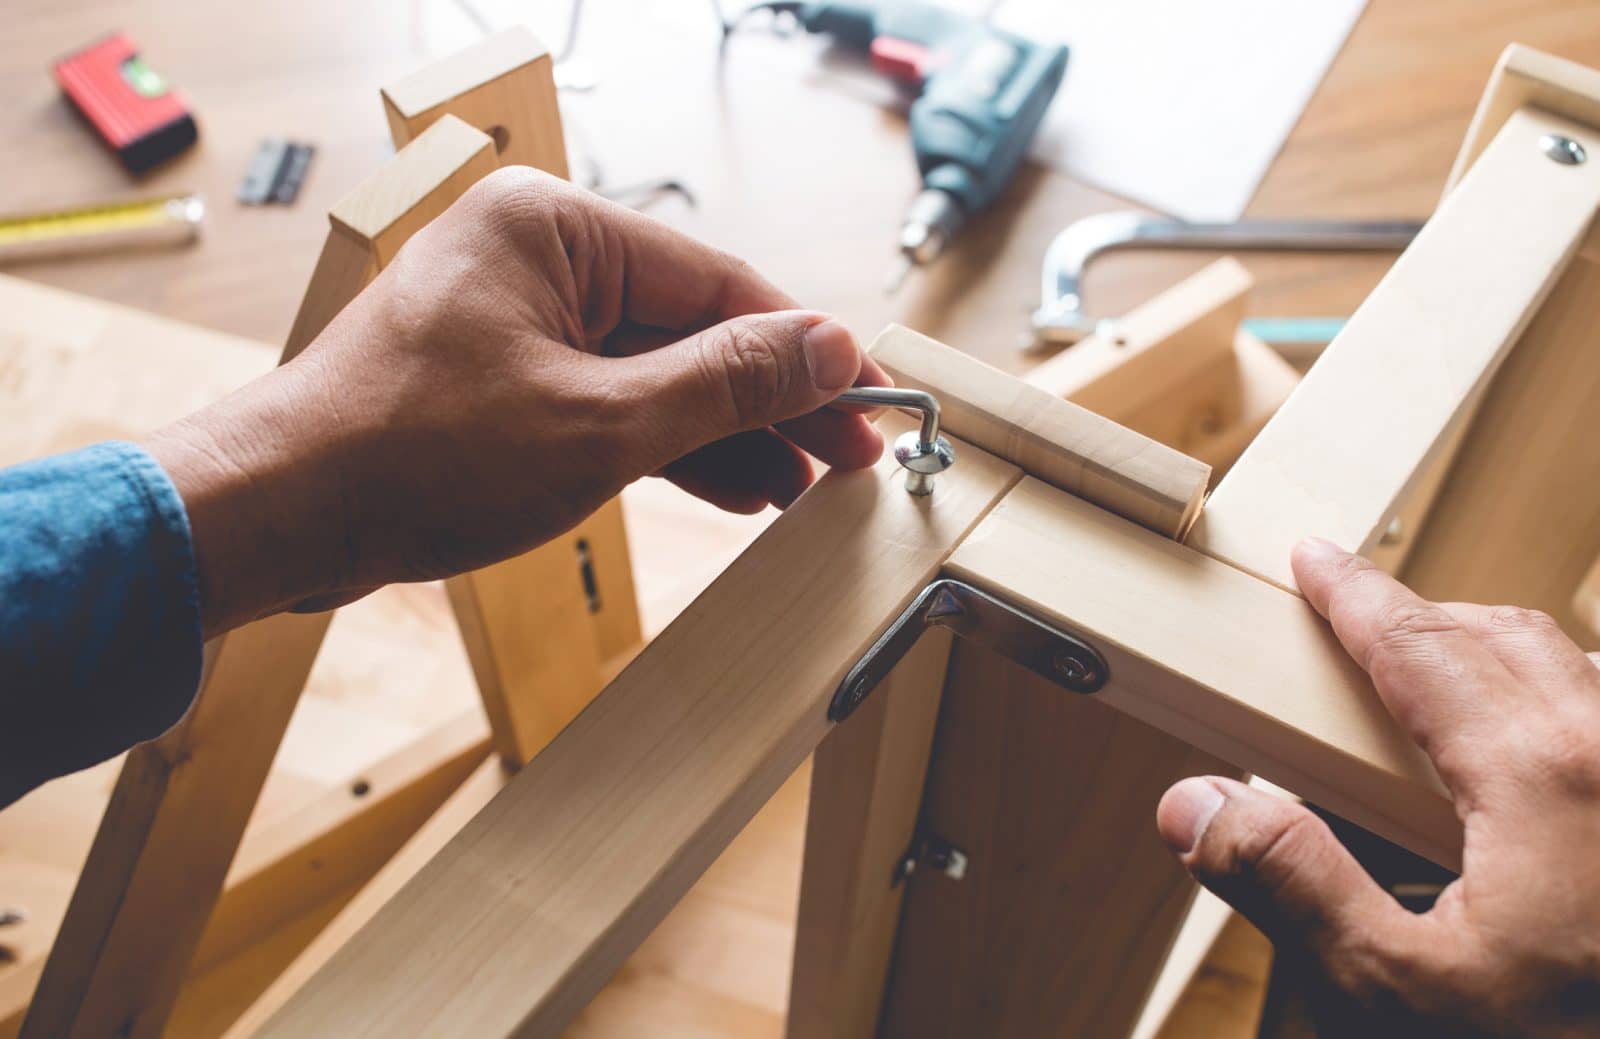 Person assembling furniture using a screwdriver and following instructions.